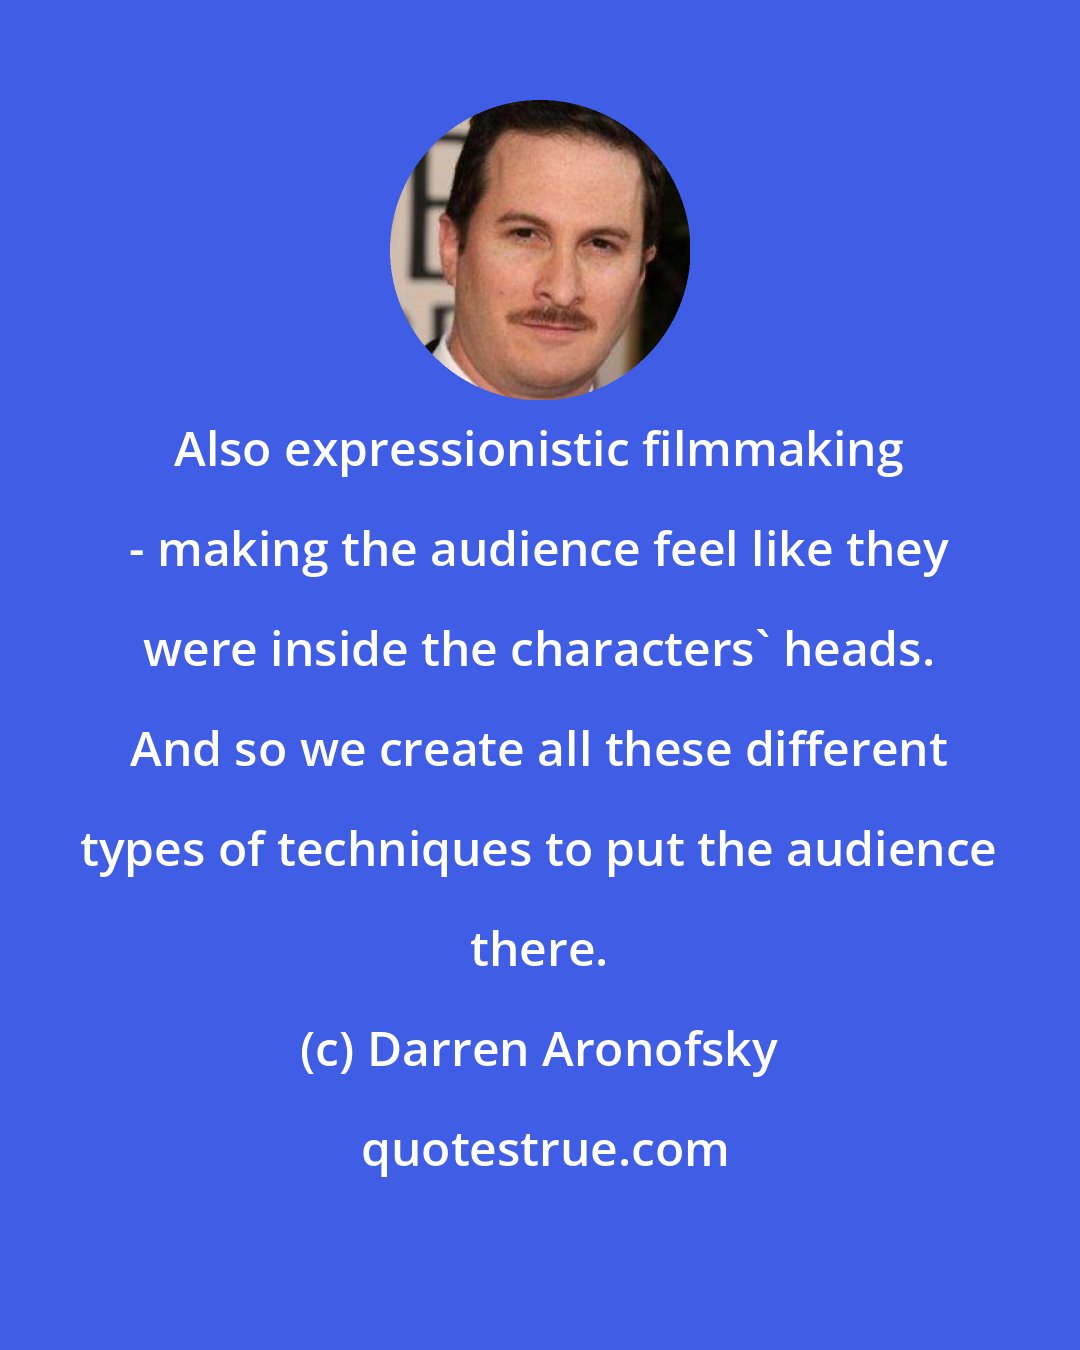 Darren Aronofsky: Also expressionistic filmmaking - making the audience feel like they were inside the characters' heads. And so we create all these different types of techniques to put the audience there.